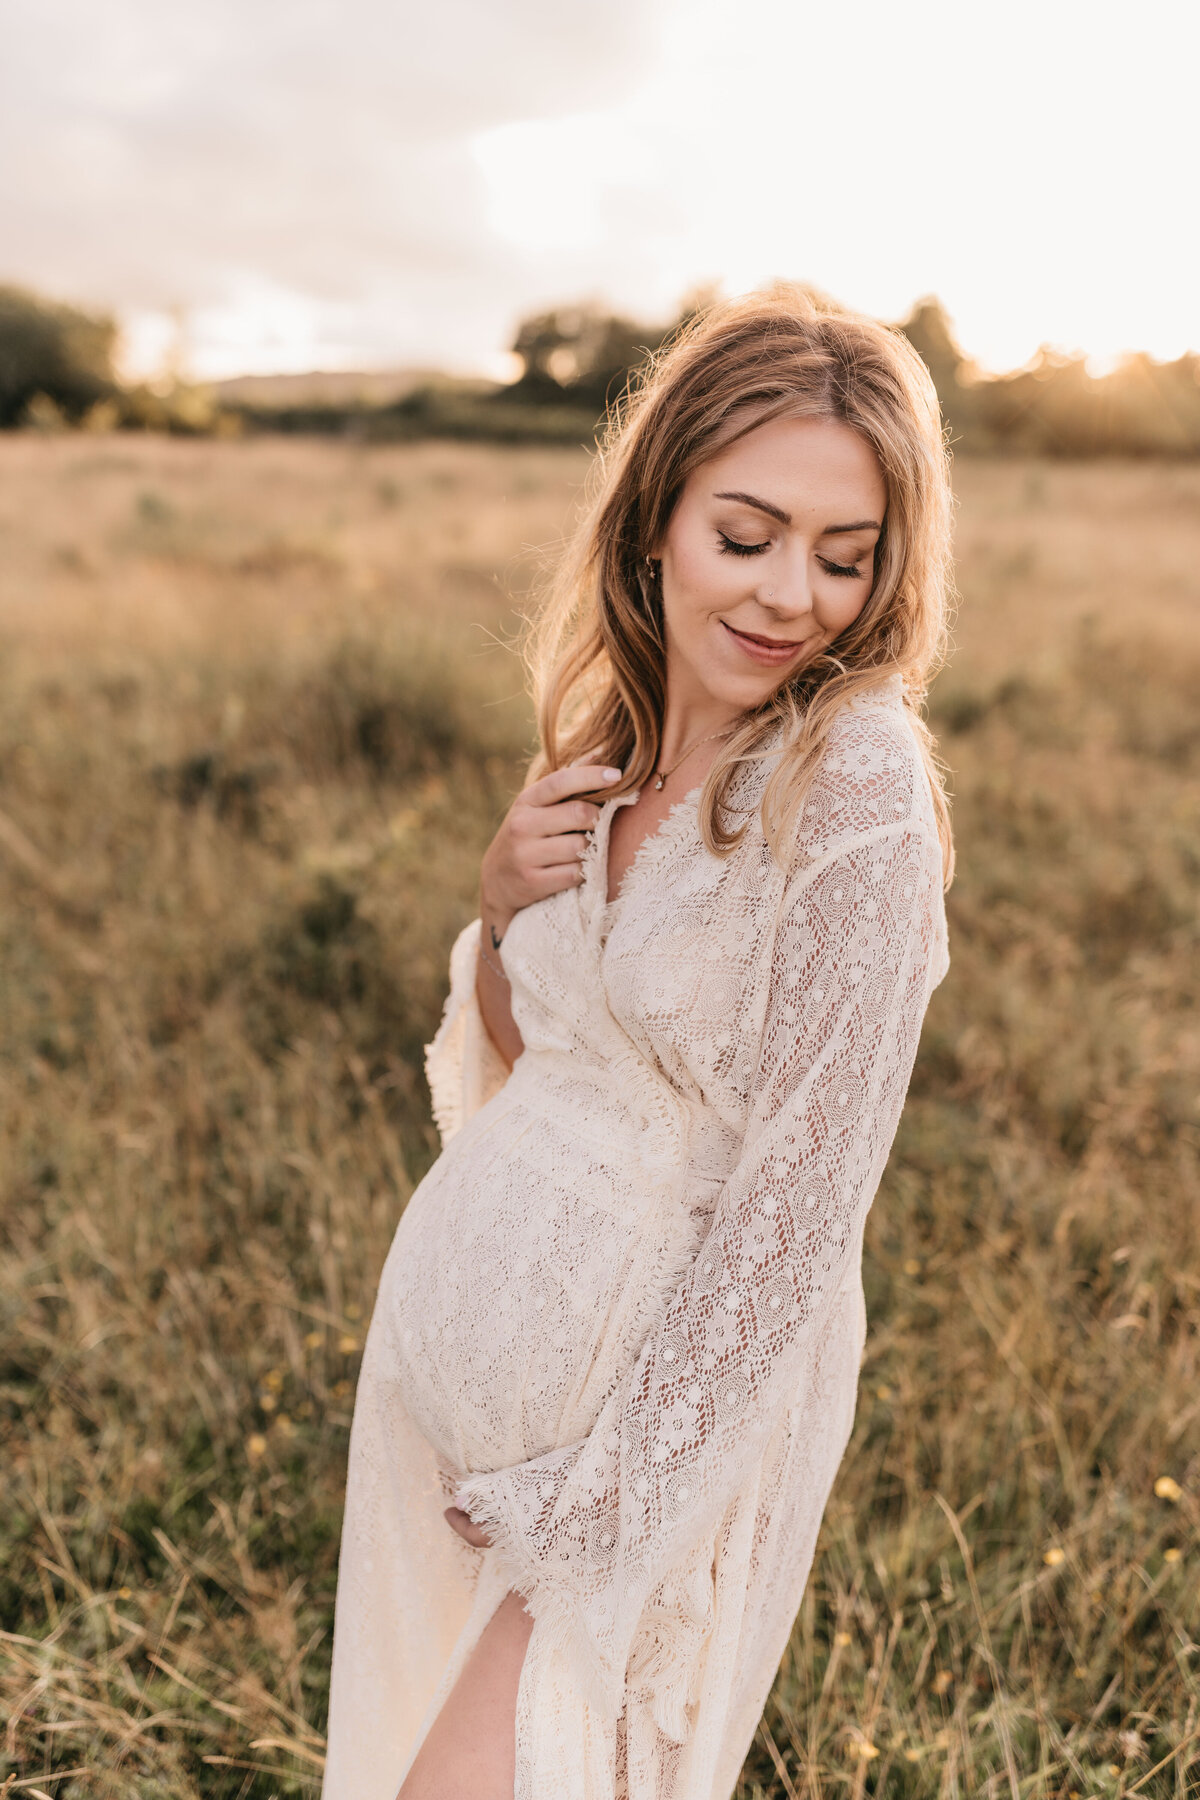 Photo of a pregnant woman in a lace dress with her hands in her hair